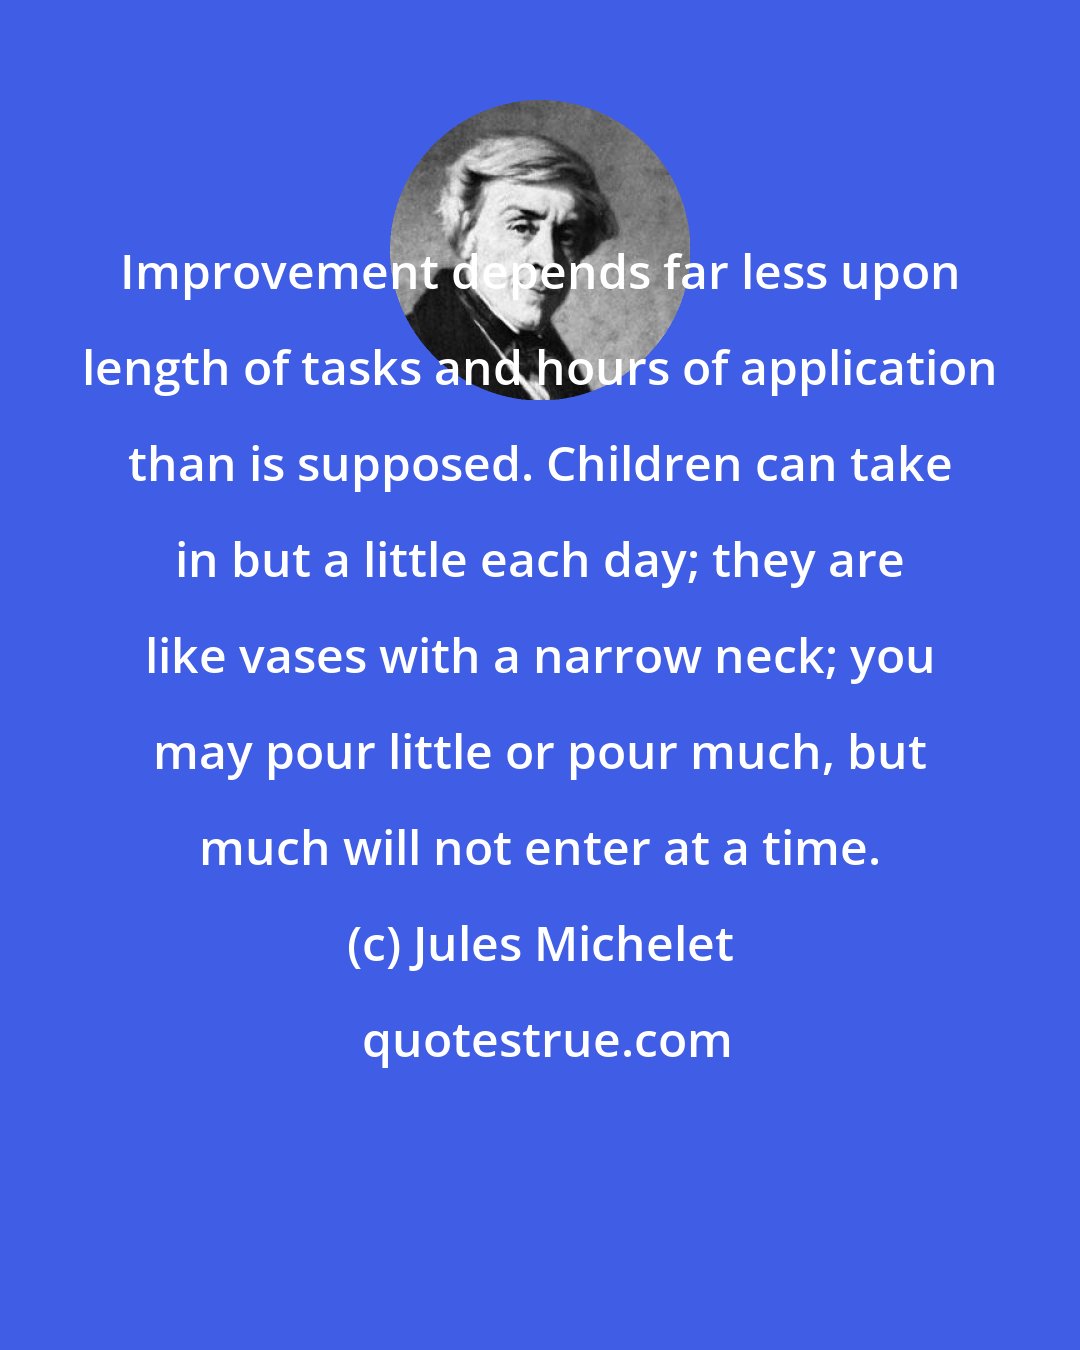 Jules Michelet: Improvement depends far less upon length of tasks and hours of application than is supposed. Children can take in but a little each day; they are like vases with a narrow neck; you may pour little or pour much, but much will not enter at a time.